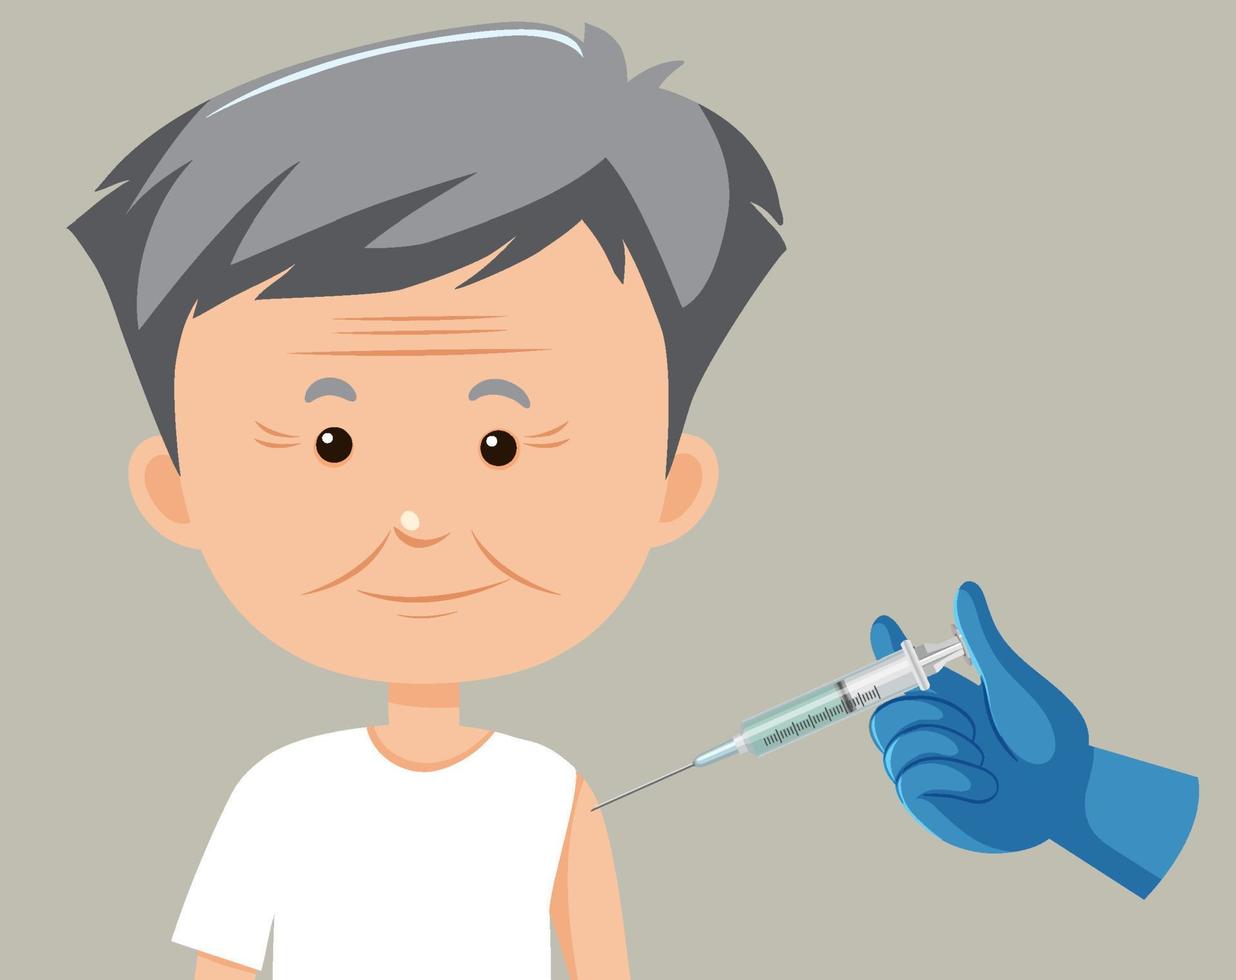 Cartoon character of an old man getting a vaccine vector